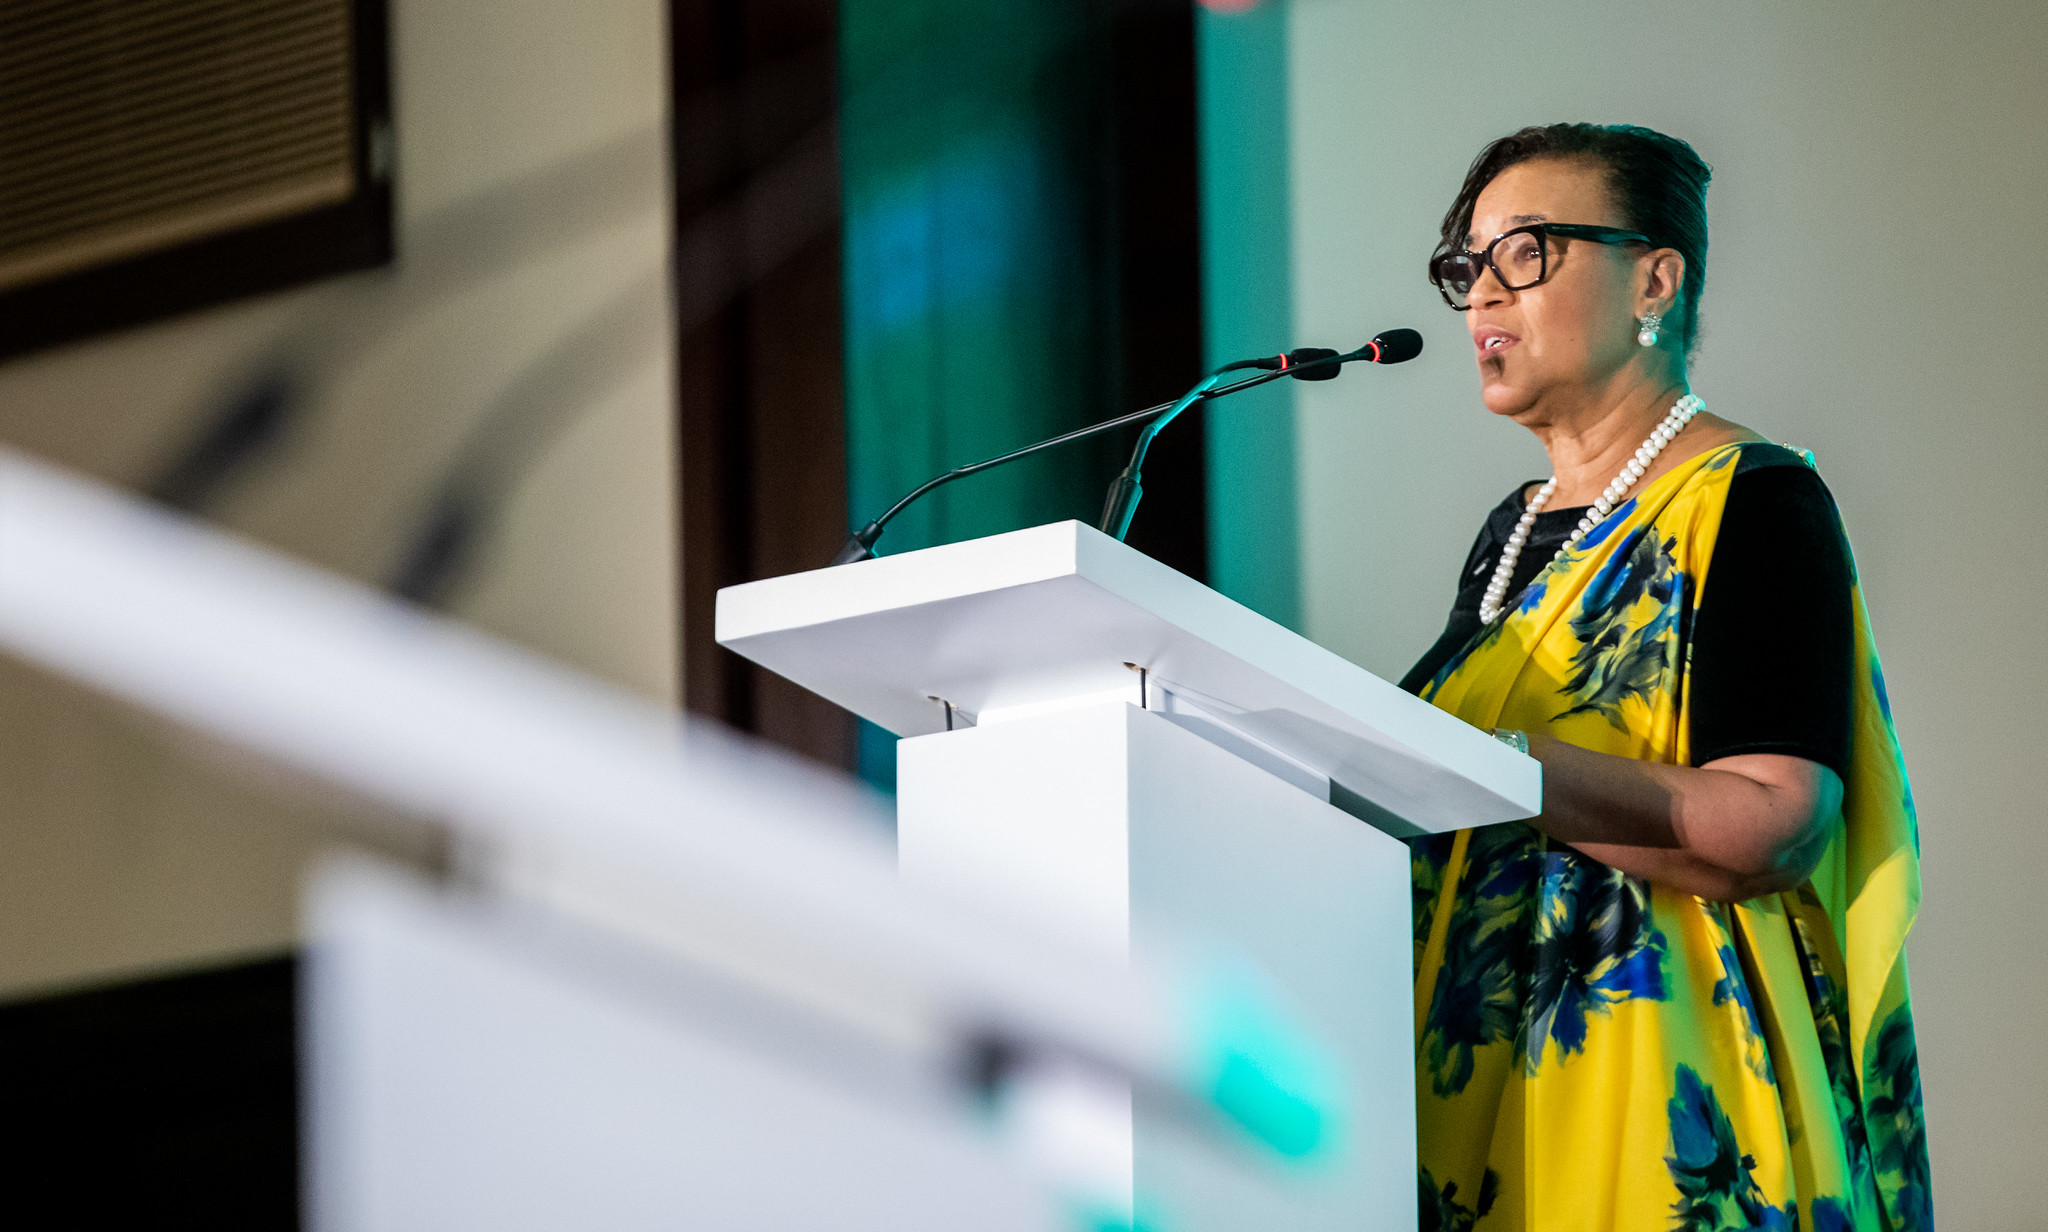 Patricia Scotland QC, Secretary General of the Commonwealth delivers remarks during the opening of the Commonwealth Women Forum in Kigali on June 20,2022. Photo by Olivier Mugwiza